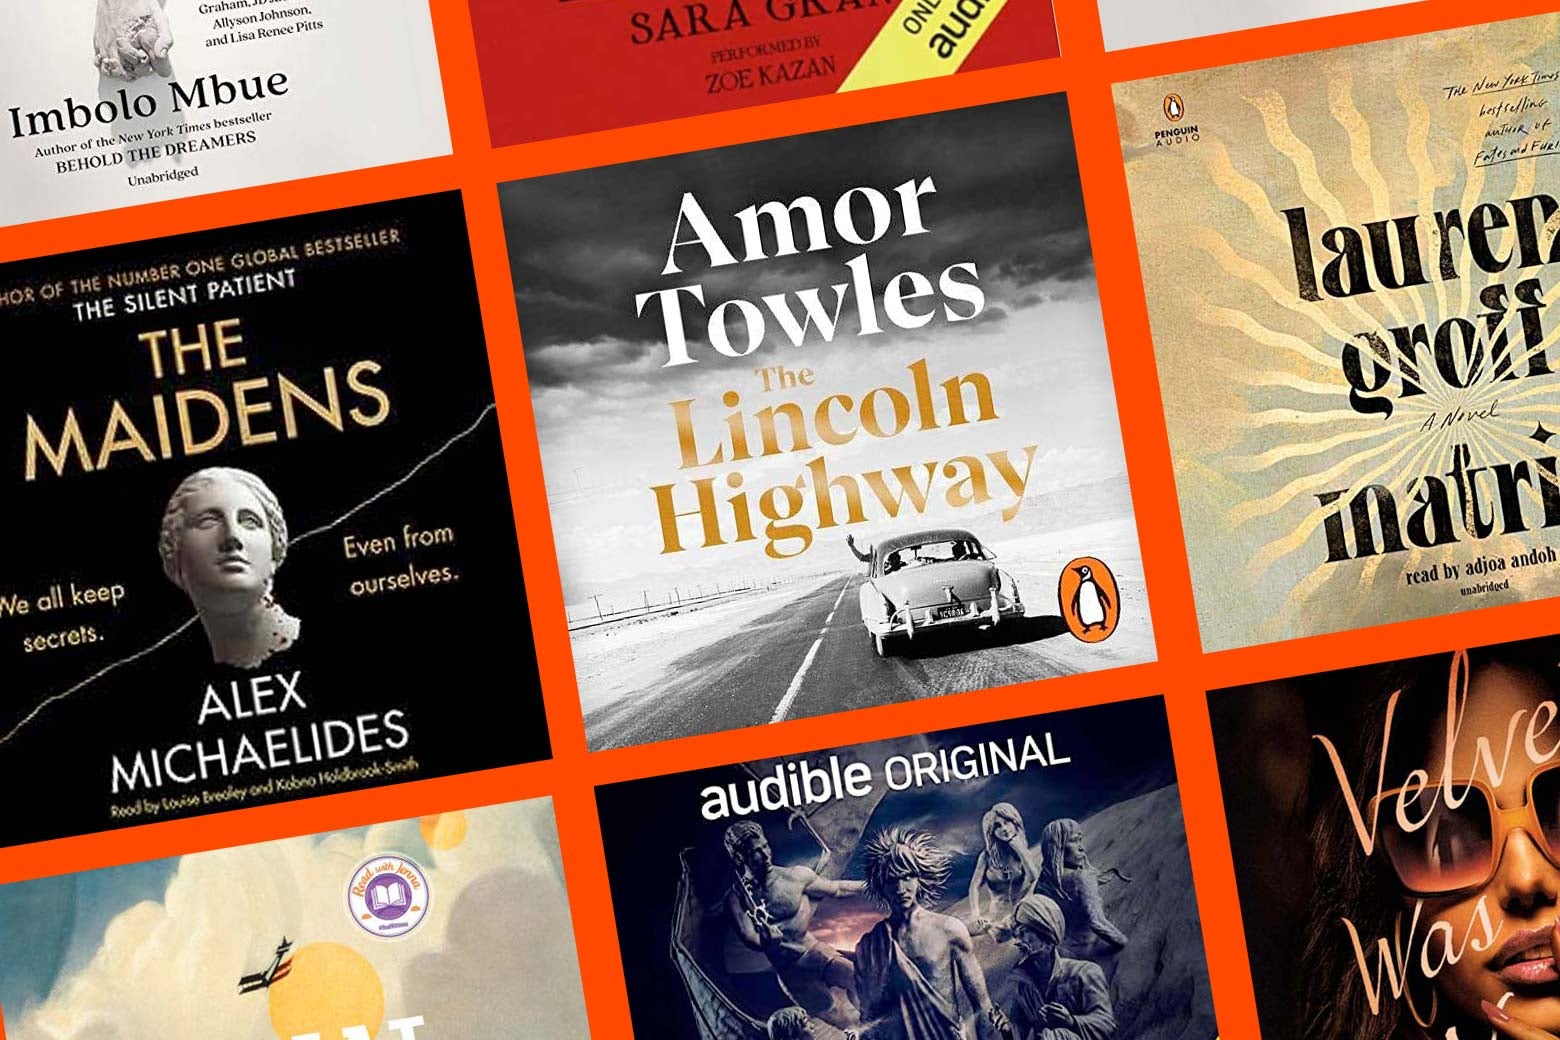 A grid of covers for the audiobooks The Maidens, The Lincoln Highway, Matrix, and more.